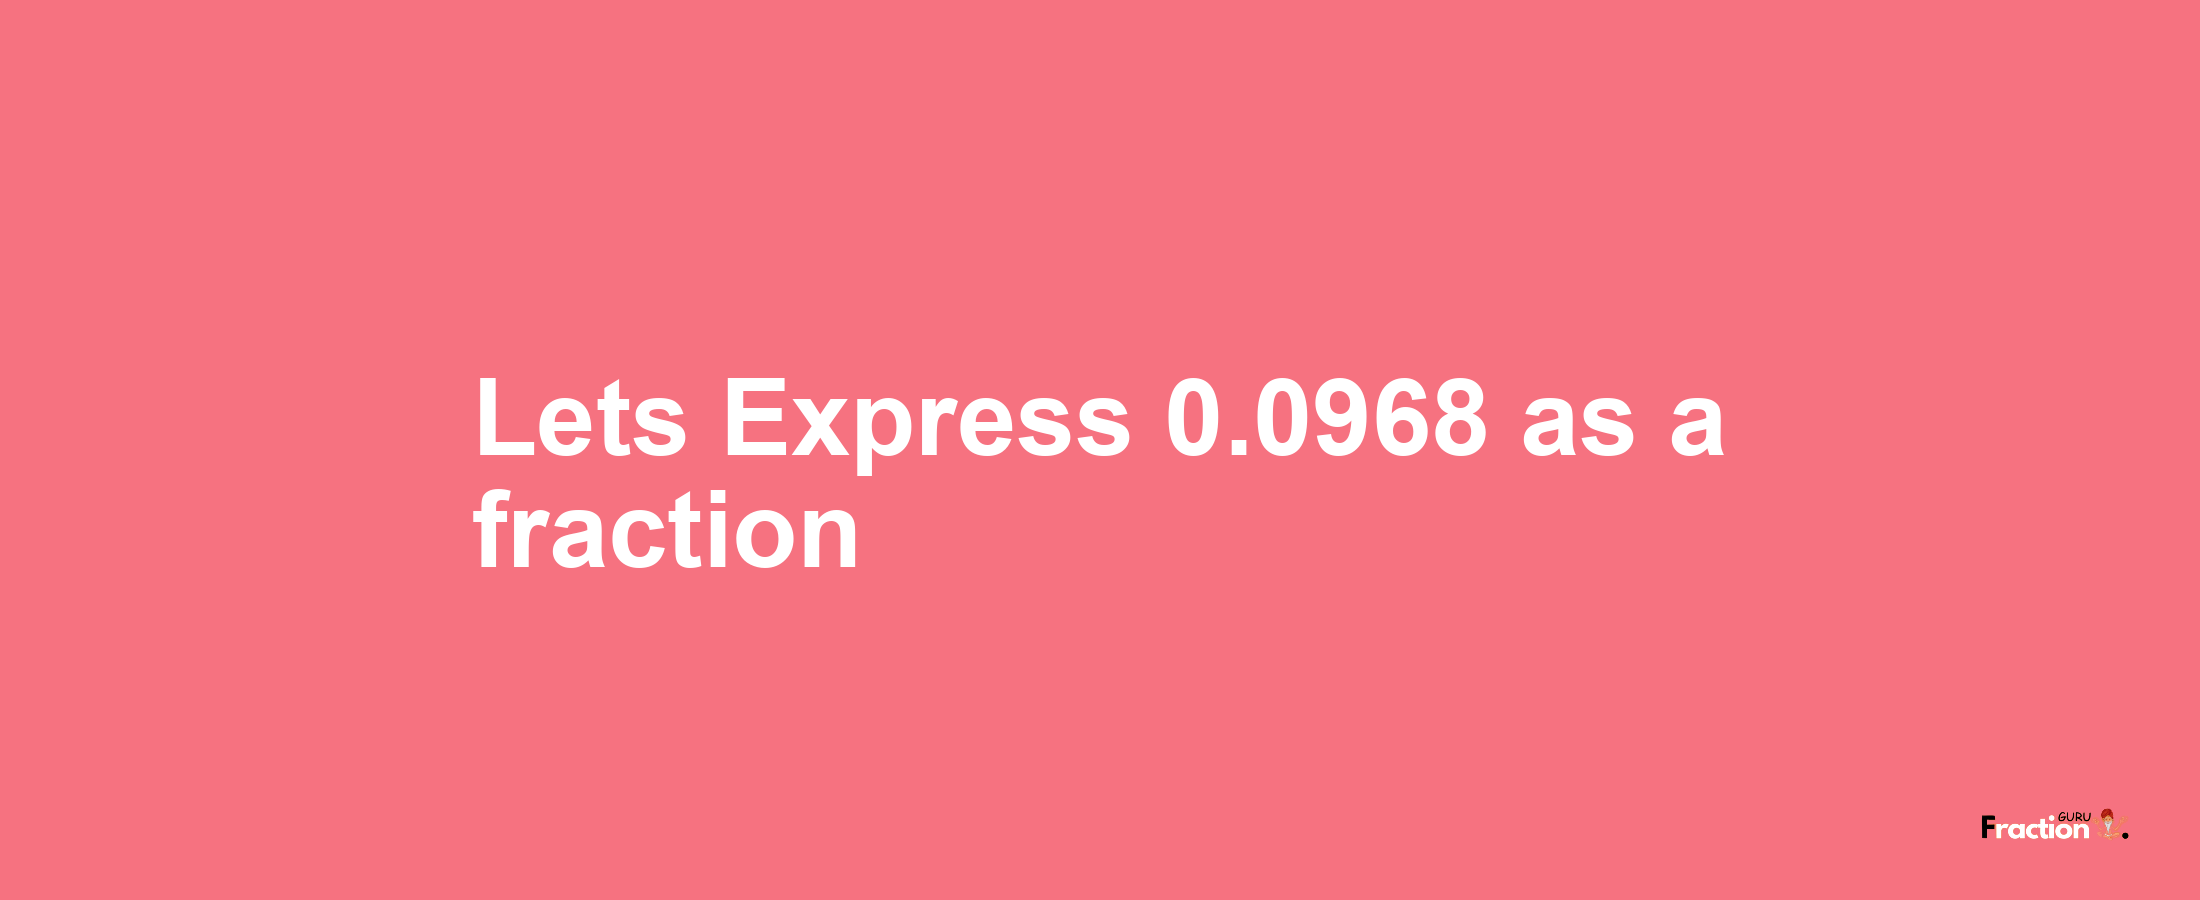 Lets Express 0.0968 as afraction